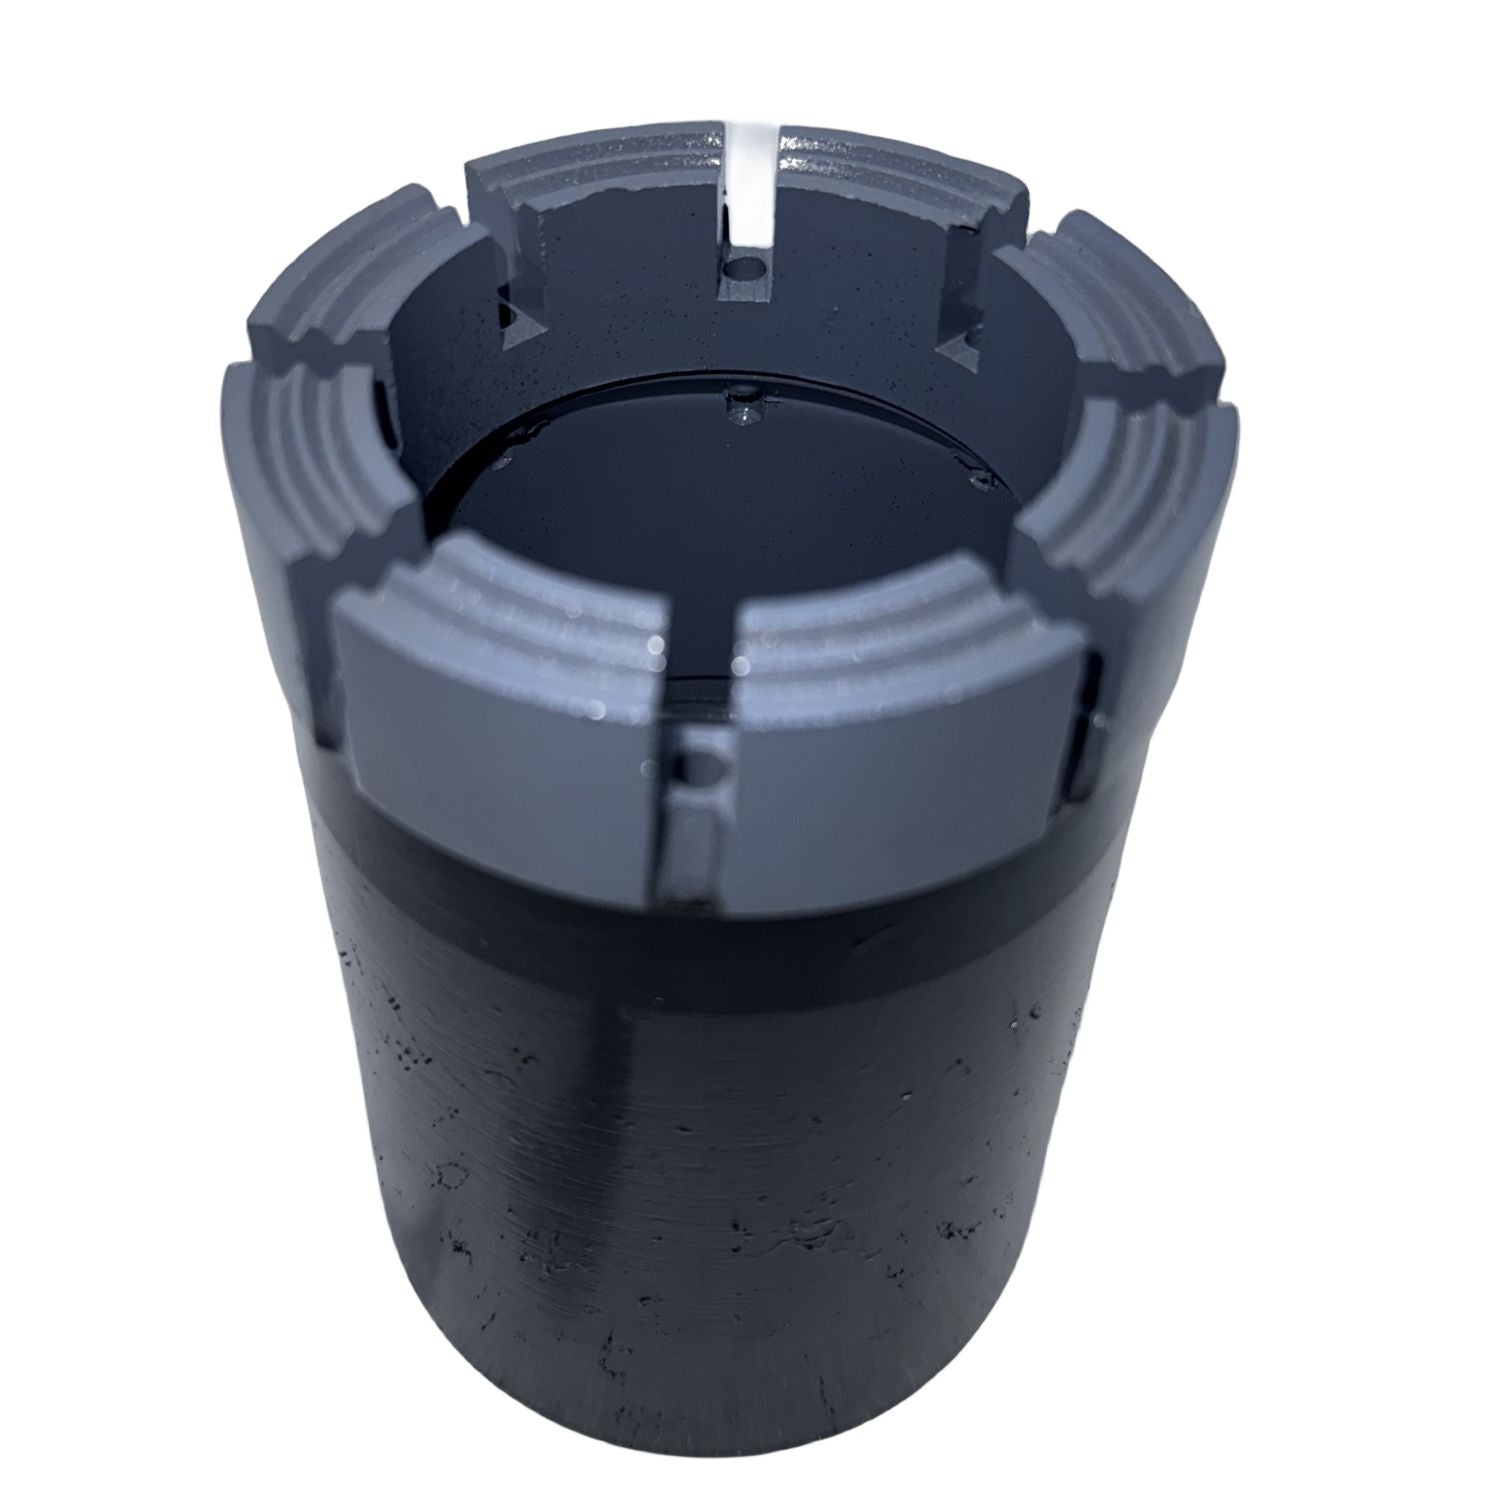 TSP-Core-Drill-Bits-for-Hard-Rock-and-Deep-Well-Sampling---Ideal-for-Geotechnical-Exploration